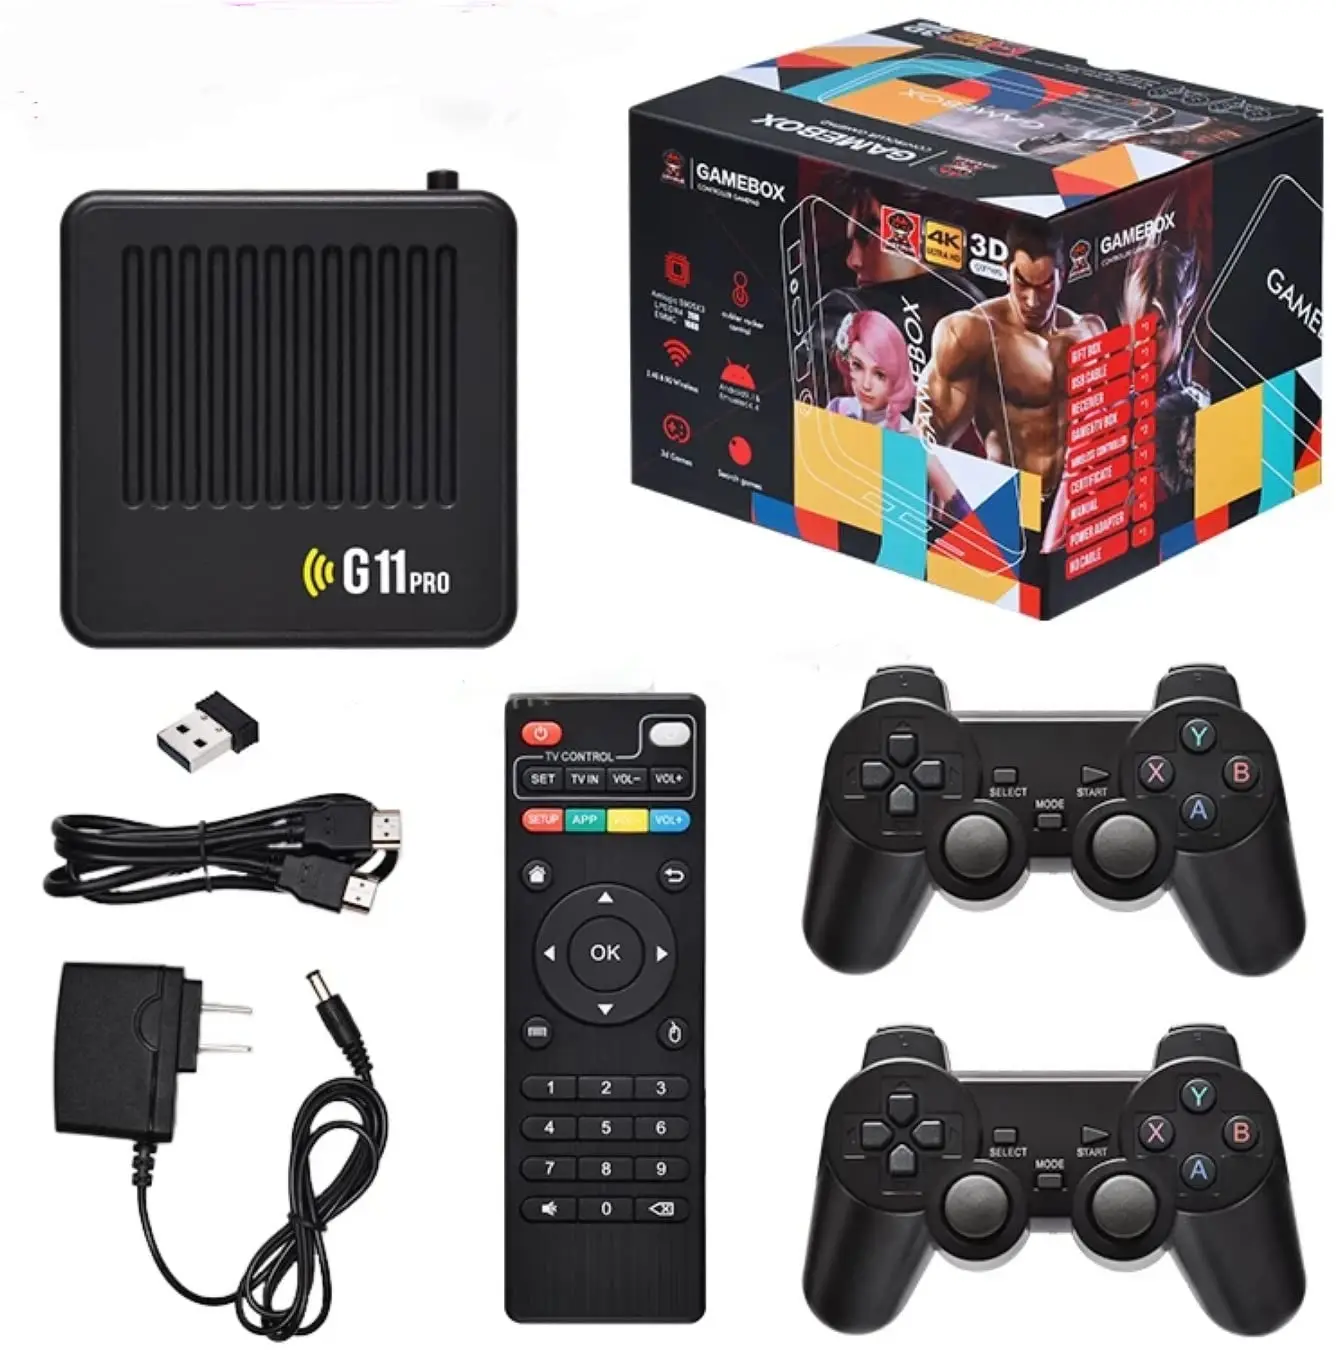 

G11 Pro Game Box 4K HD TV Game Stick Video Game Console 128G Built in 40000+ Retro Games 2.4G Wireless Gamepad For PS1/GBA/FC